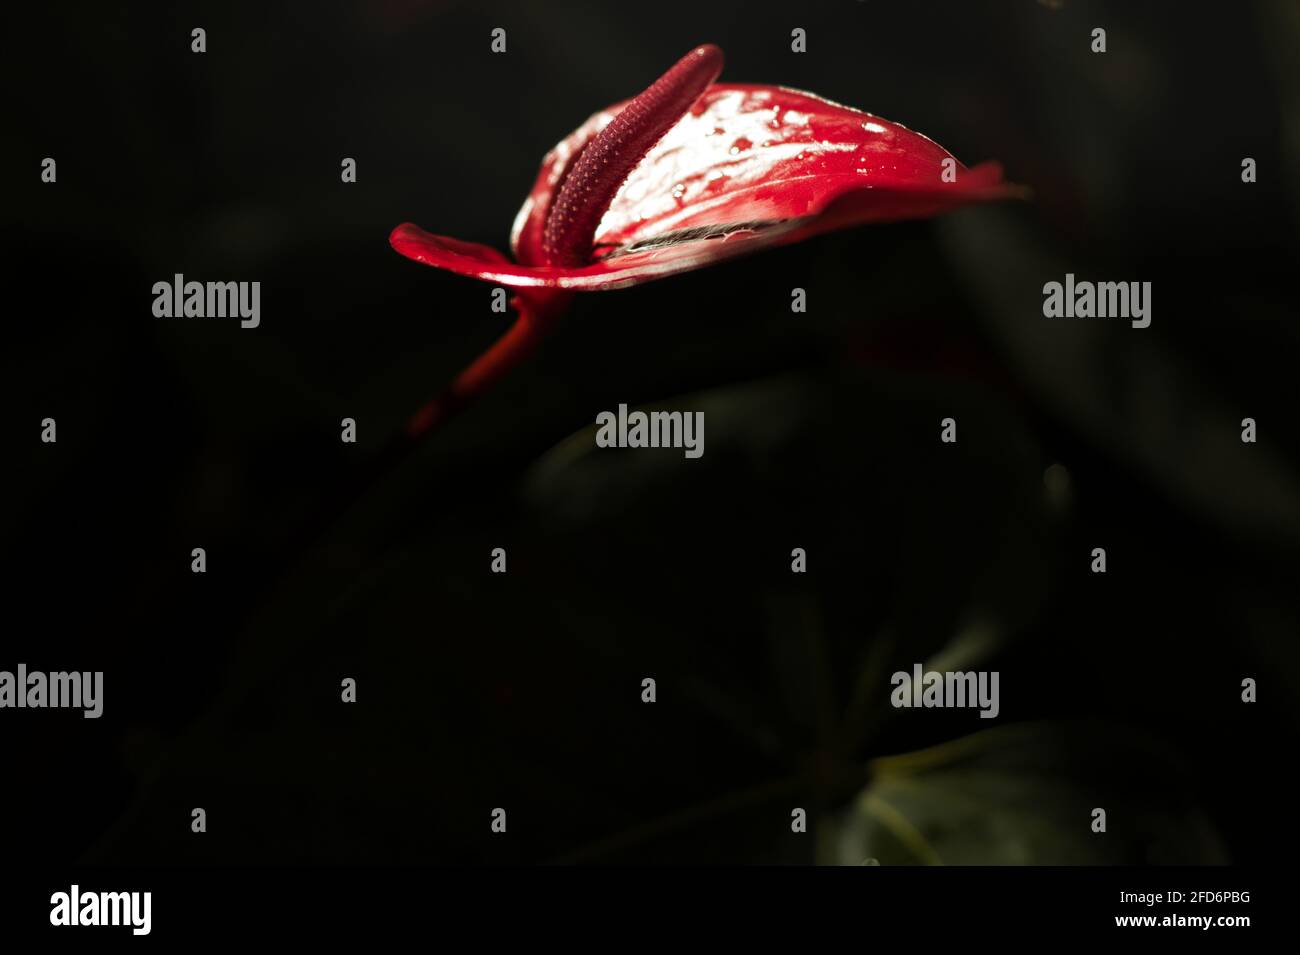 Anthurium flower in isolated close up glowing against dark background Stock Photo